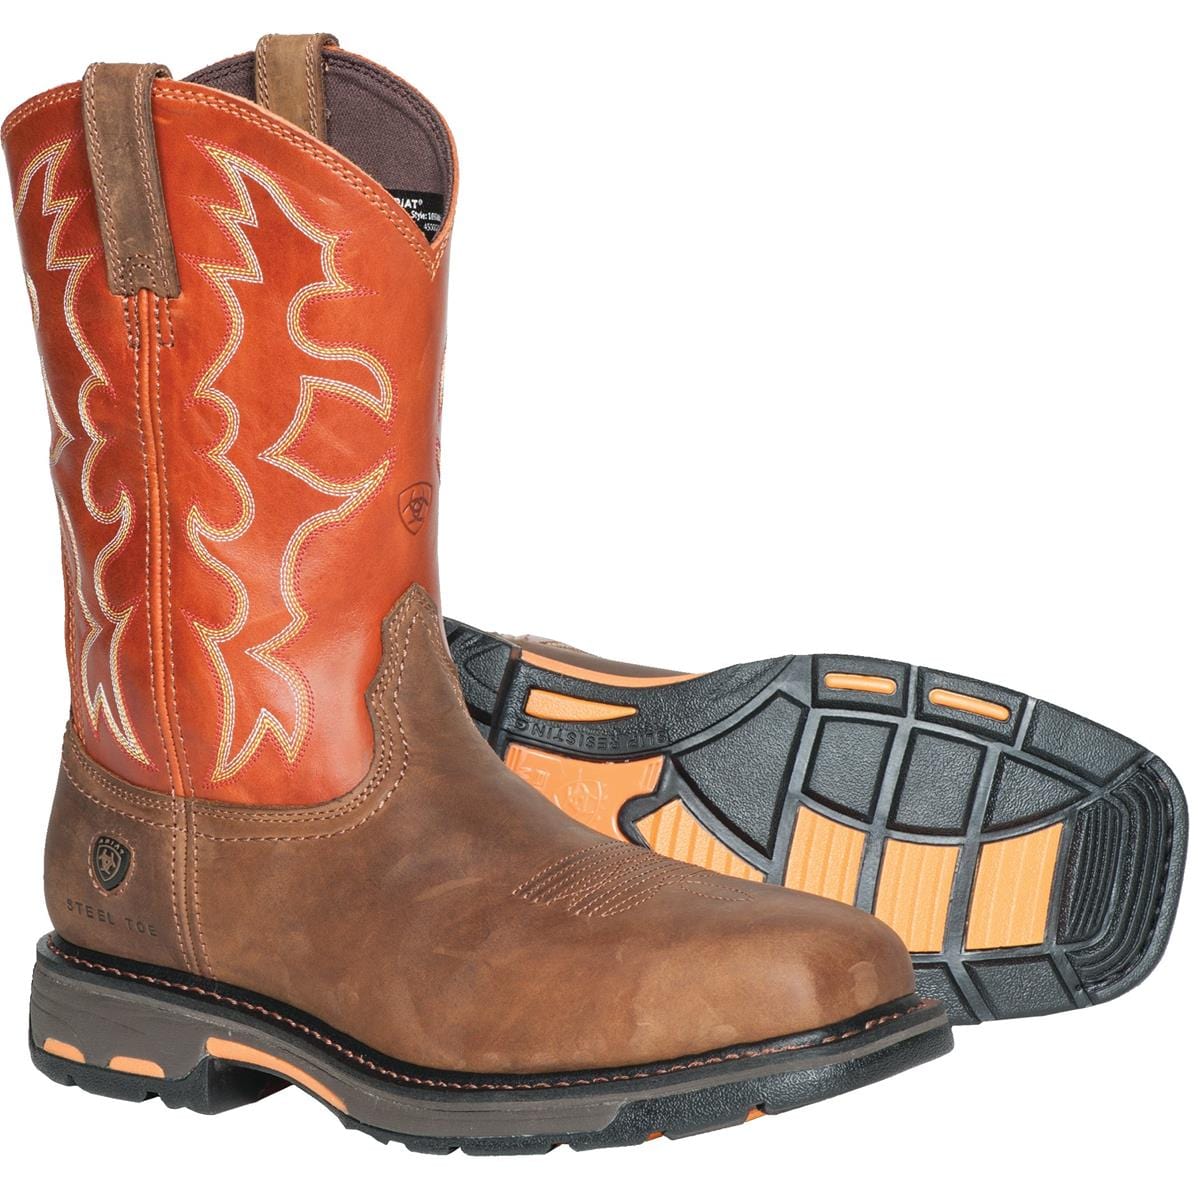 ariat boots steel toe square toe